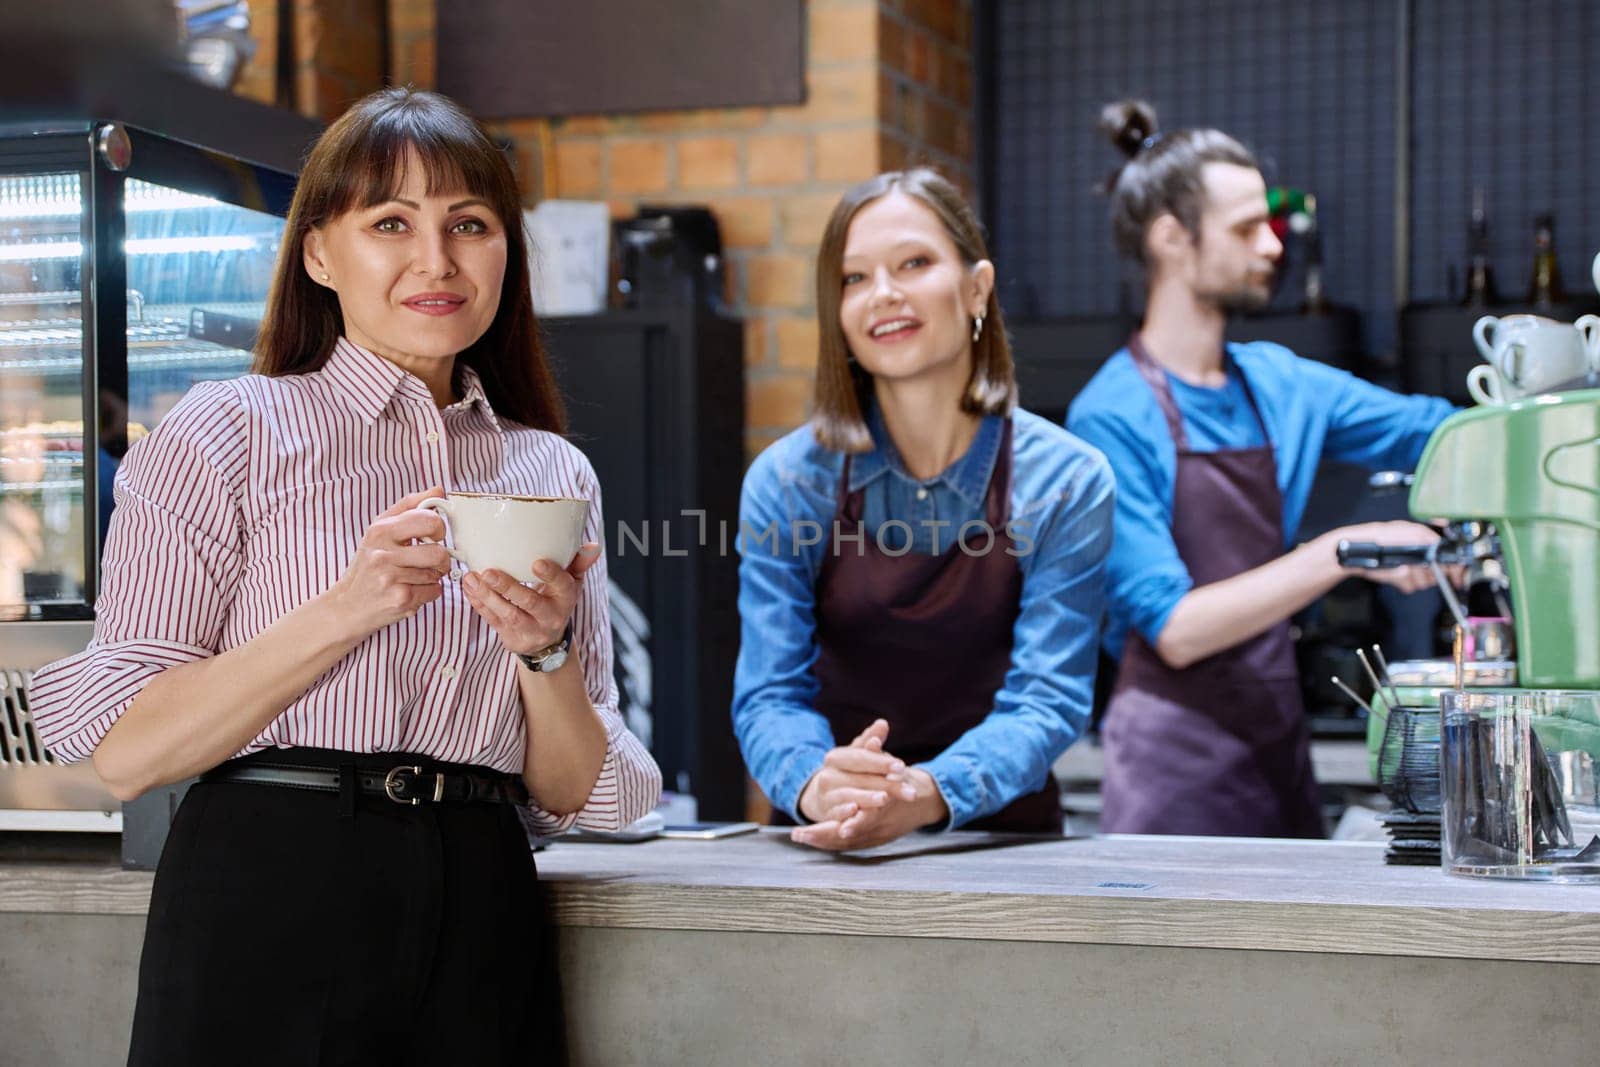 Woman customer of coffee shop near counter with cup of coffee looking at camera, restaurant workers owners at workplace. Colleagues partners in food service work, entrepreneurship, small business